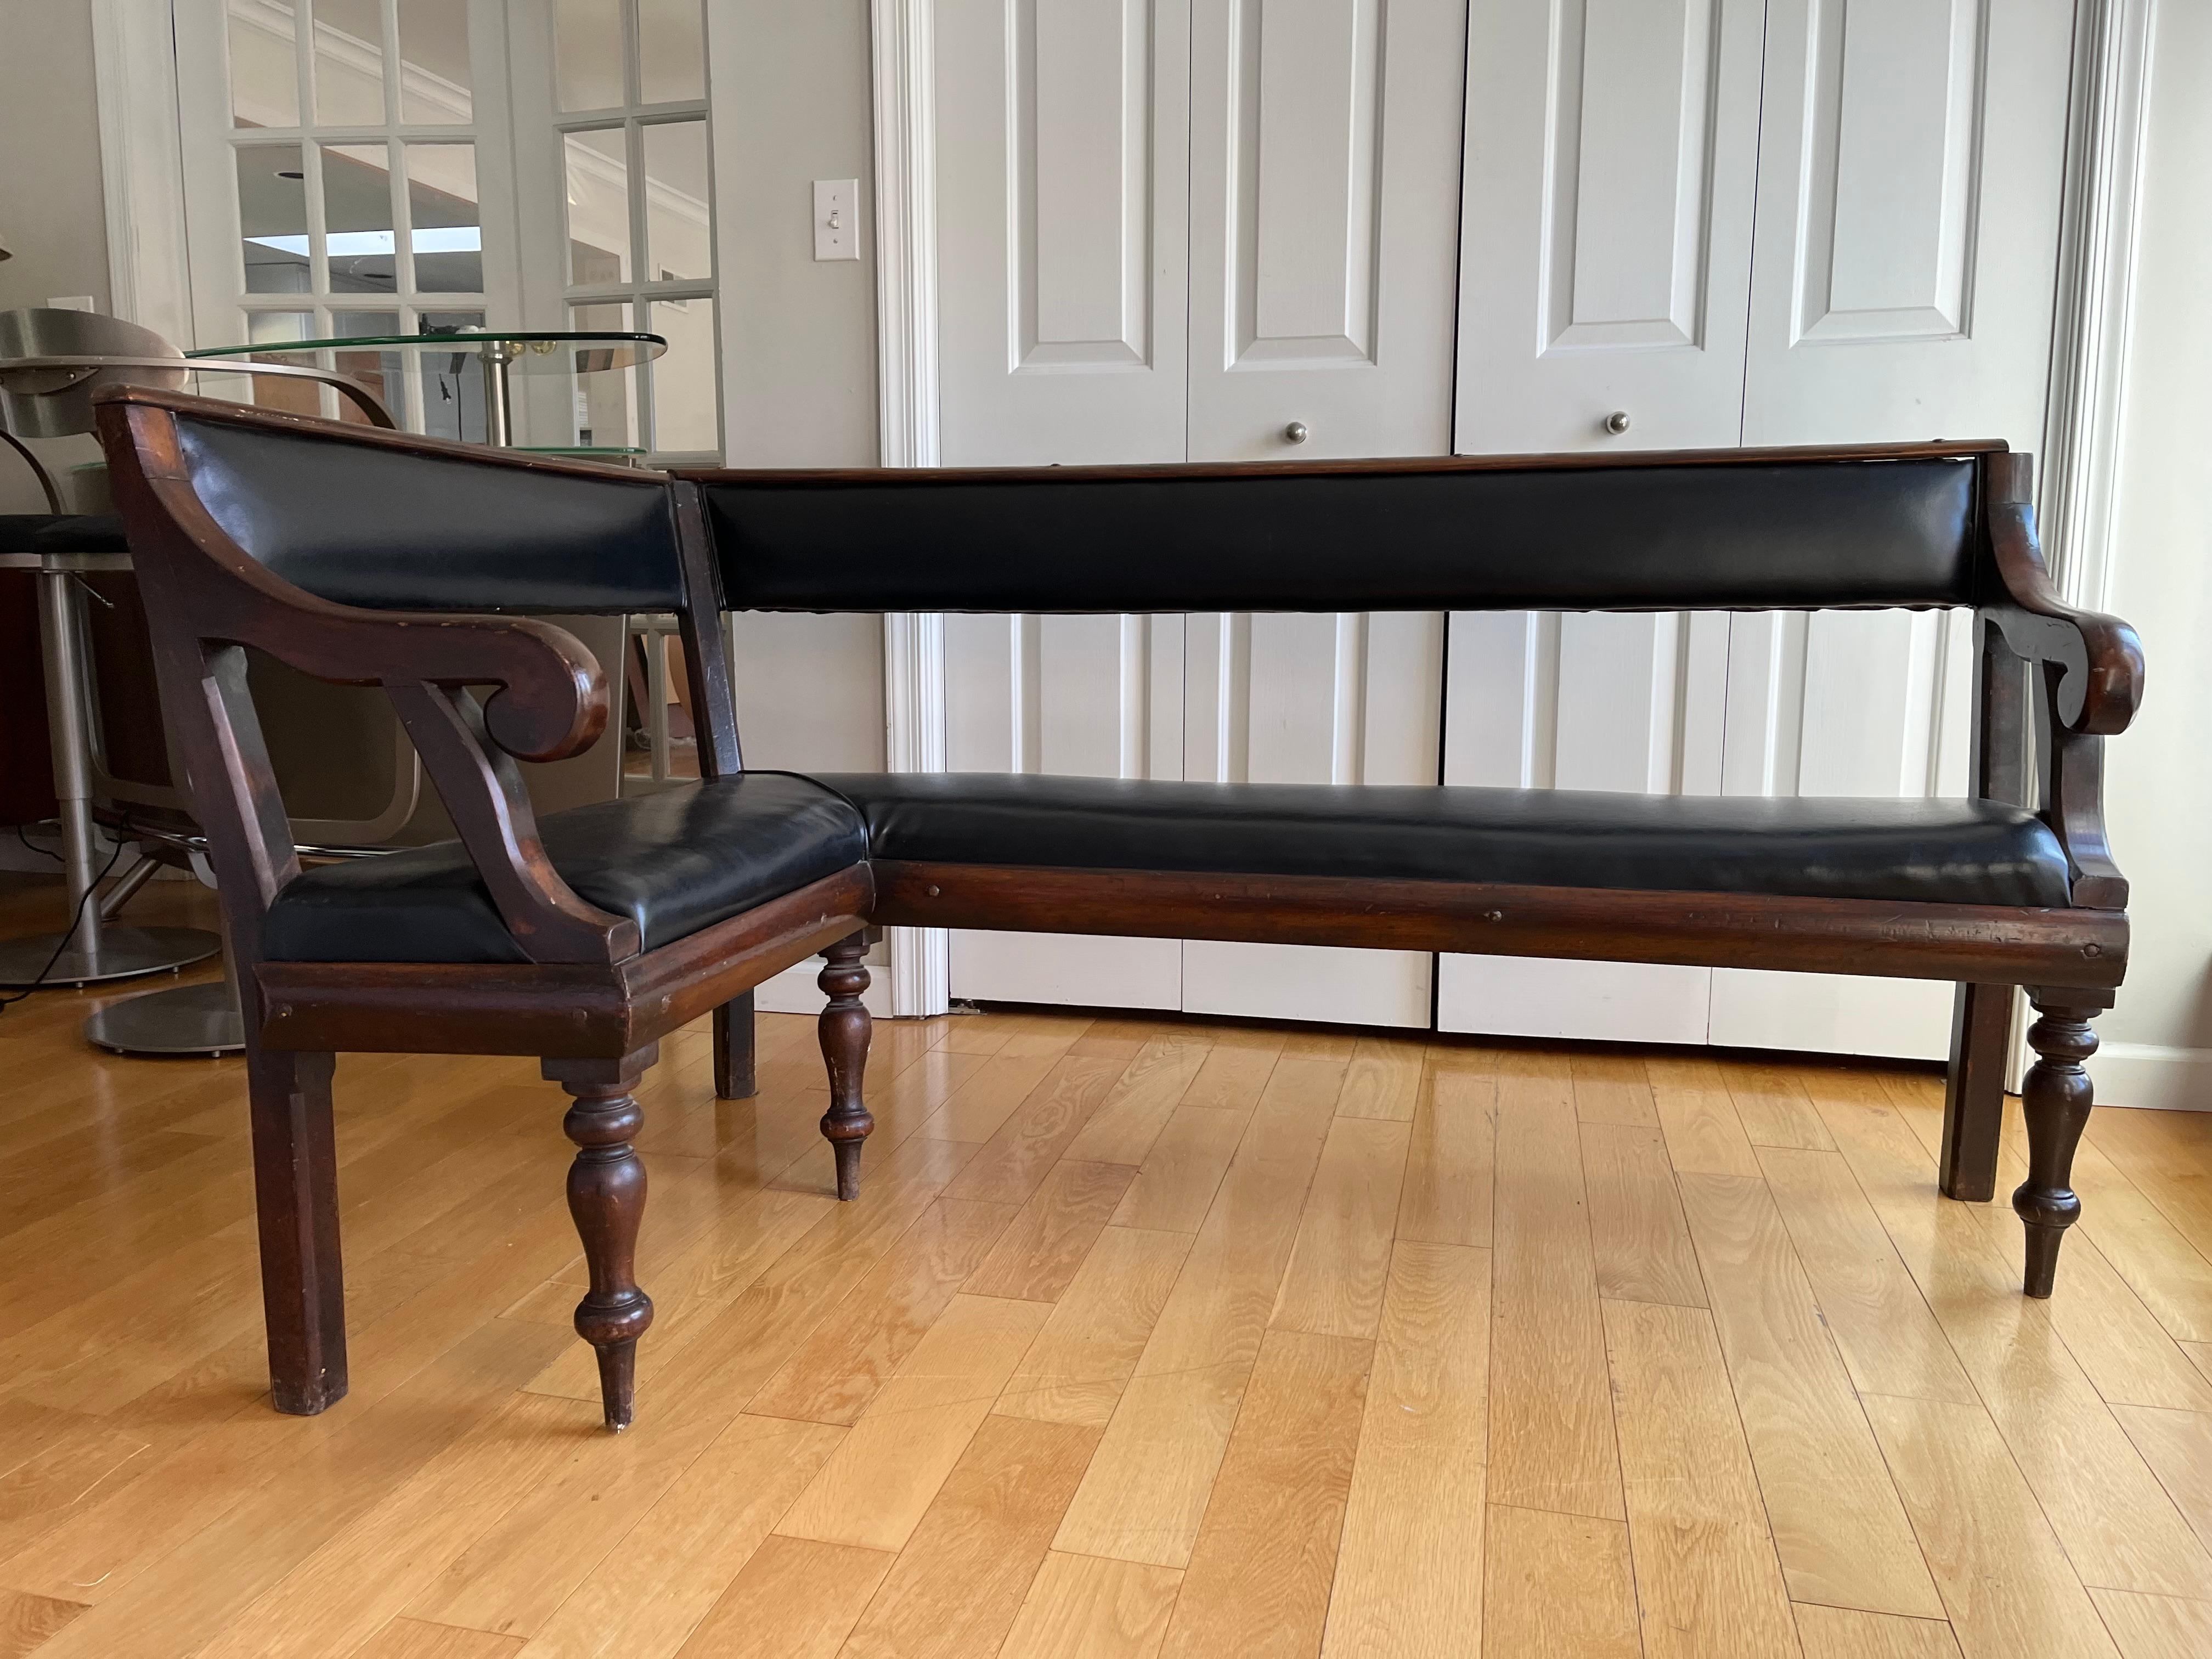 20th Century Vintage Leather Banquette/Bench, Early 1900s